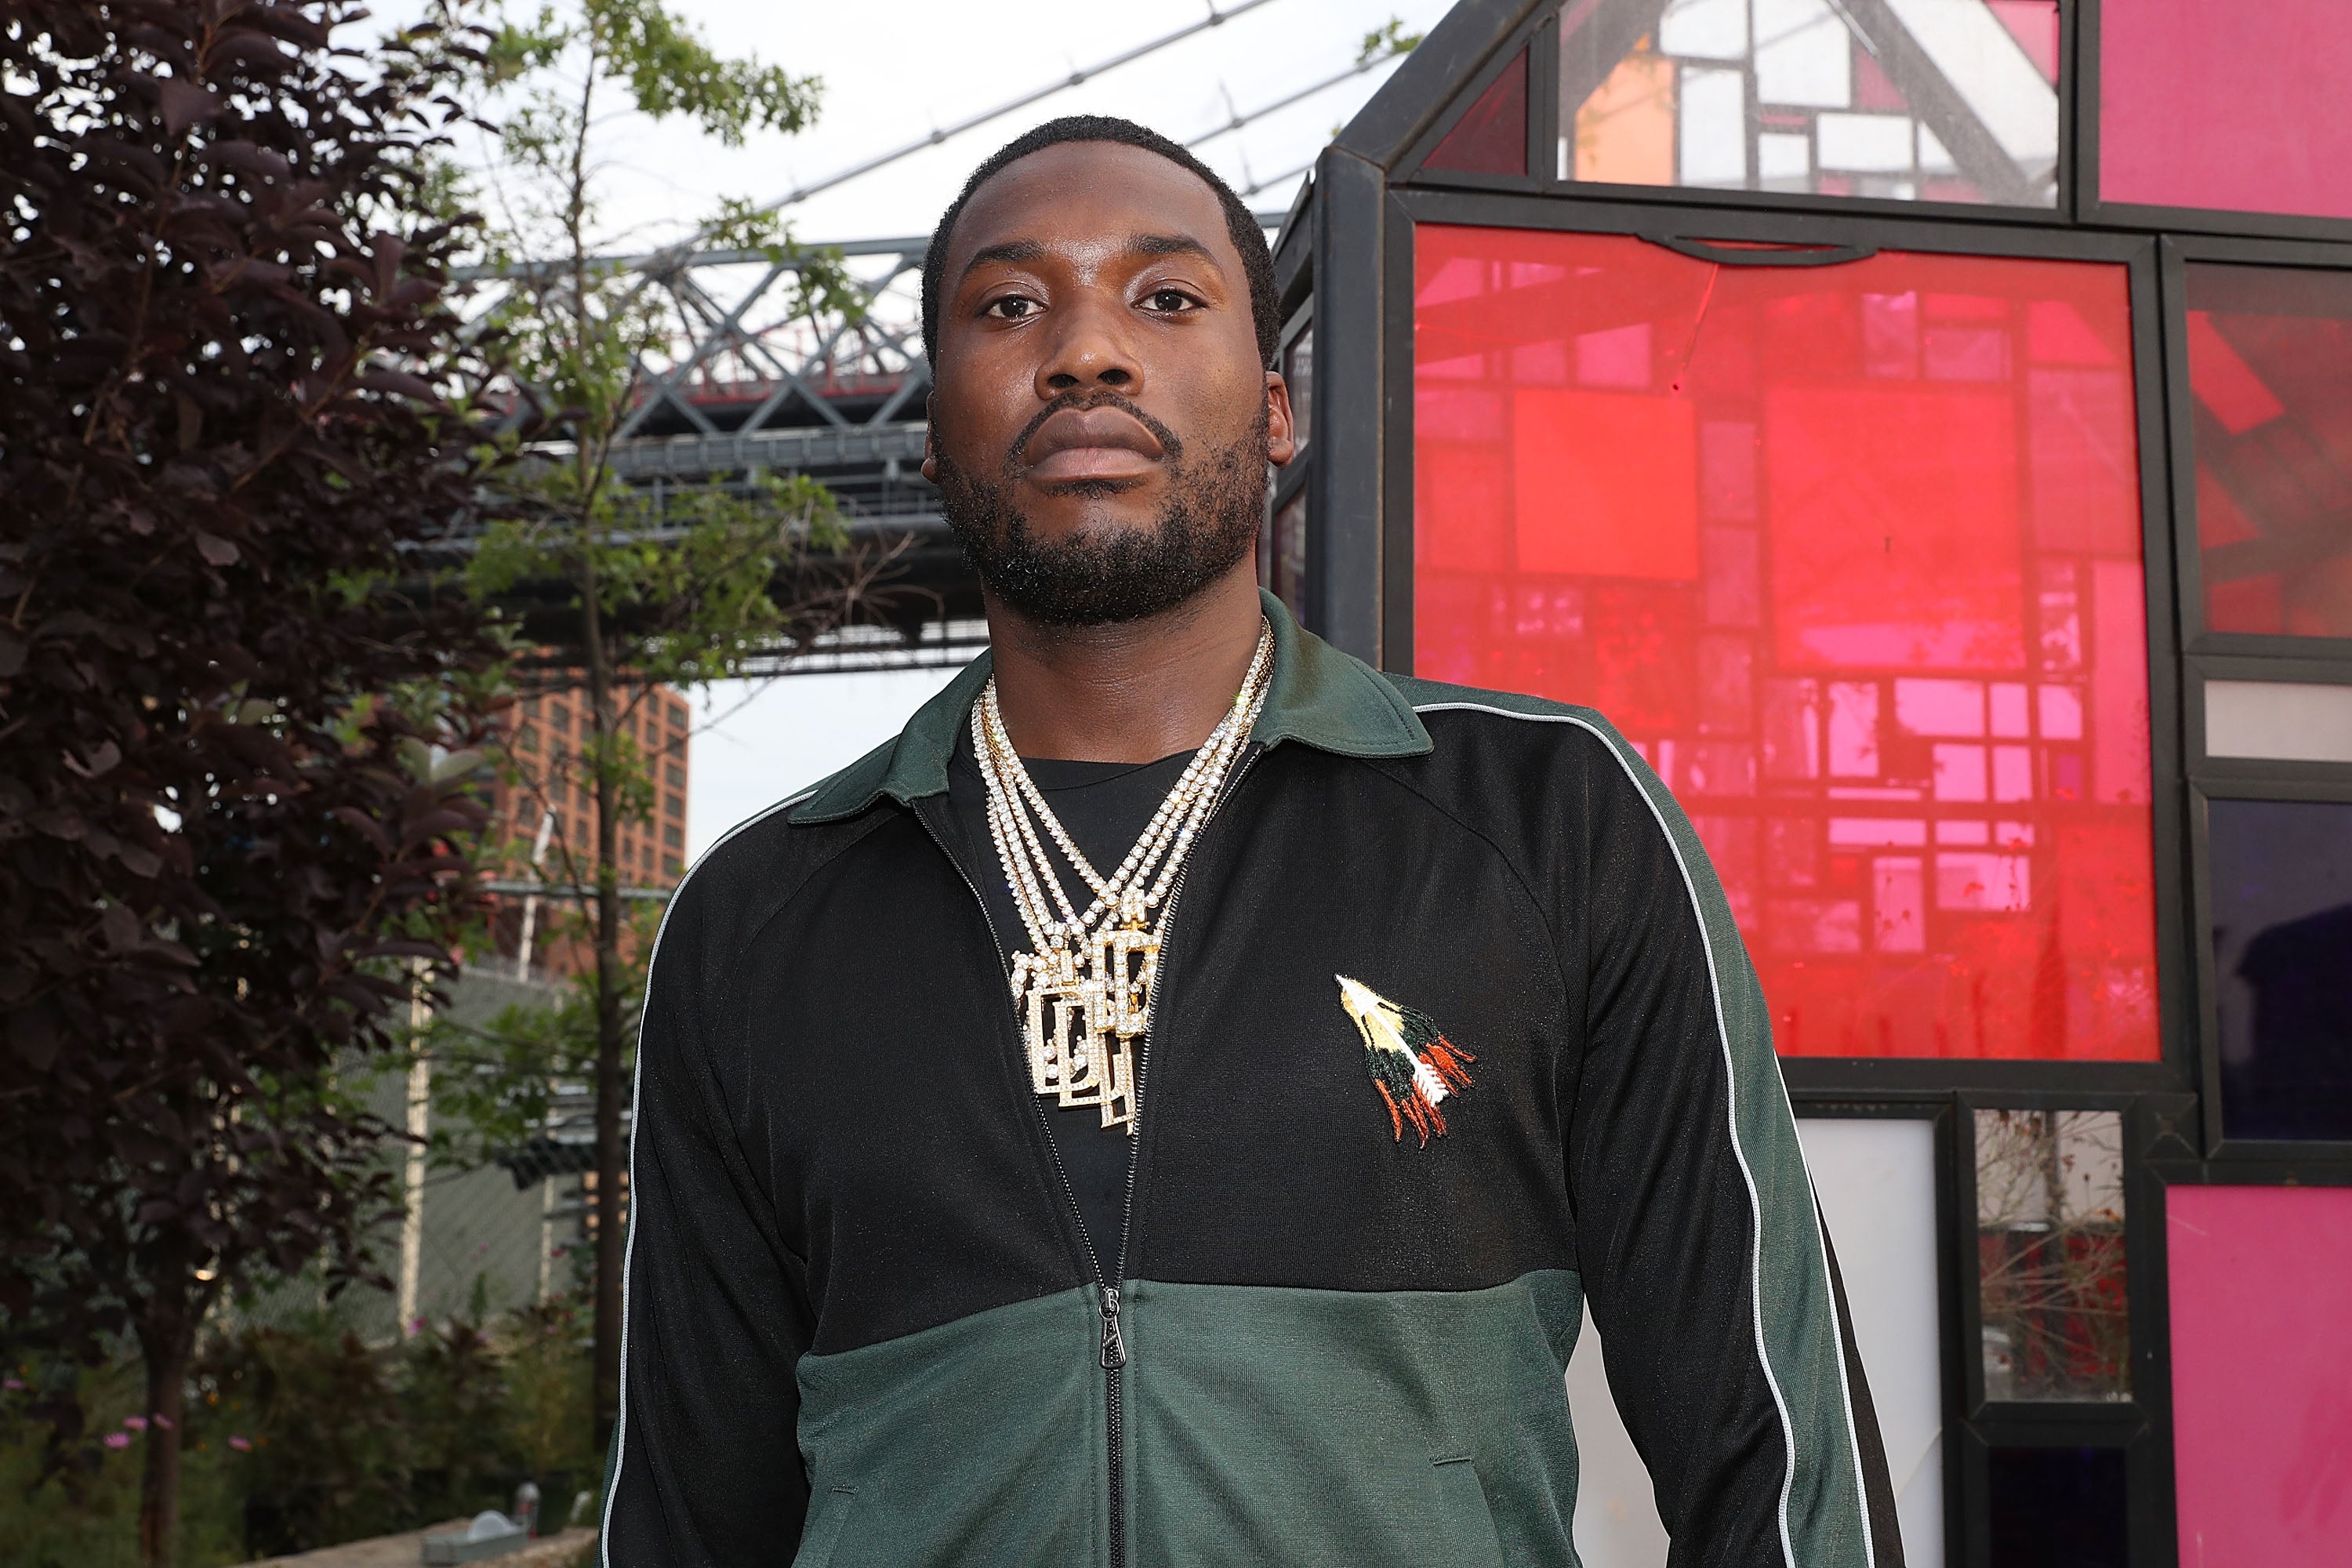 The Quick Read: Judge Accused Of Bias Denies Meek Mill's Request For Release
